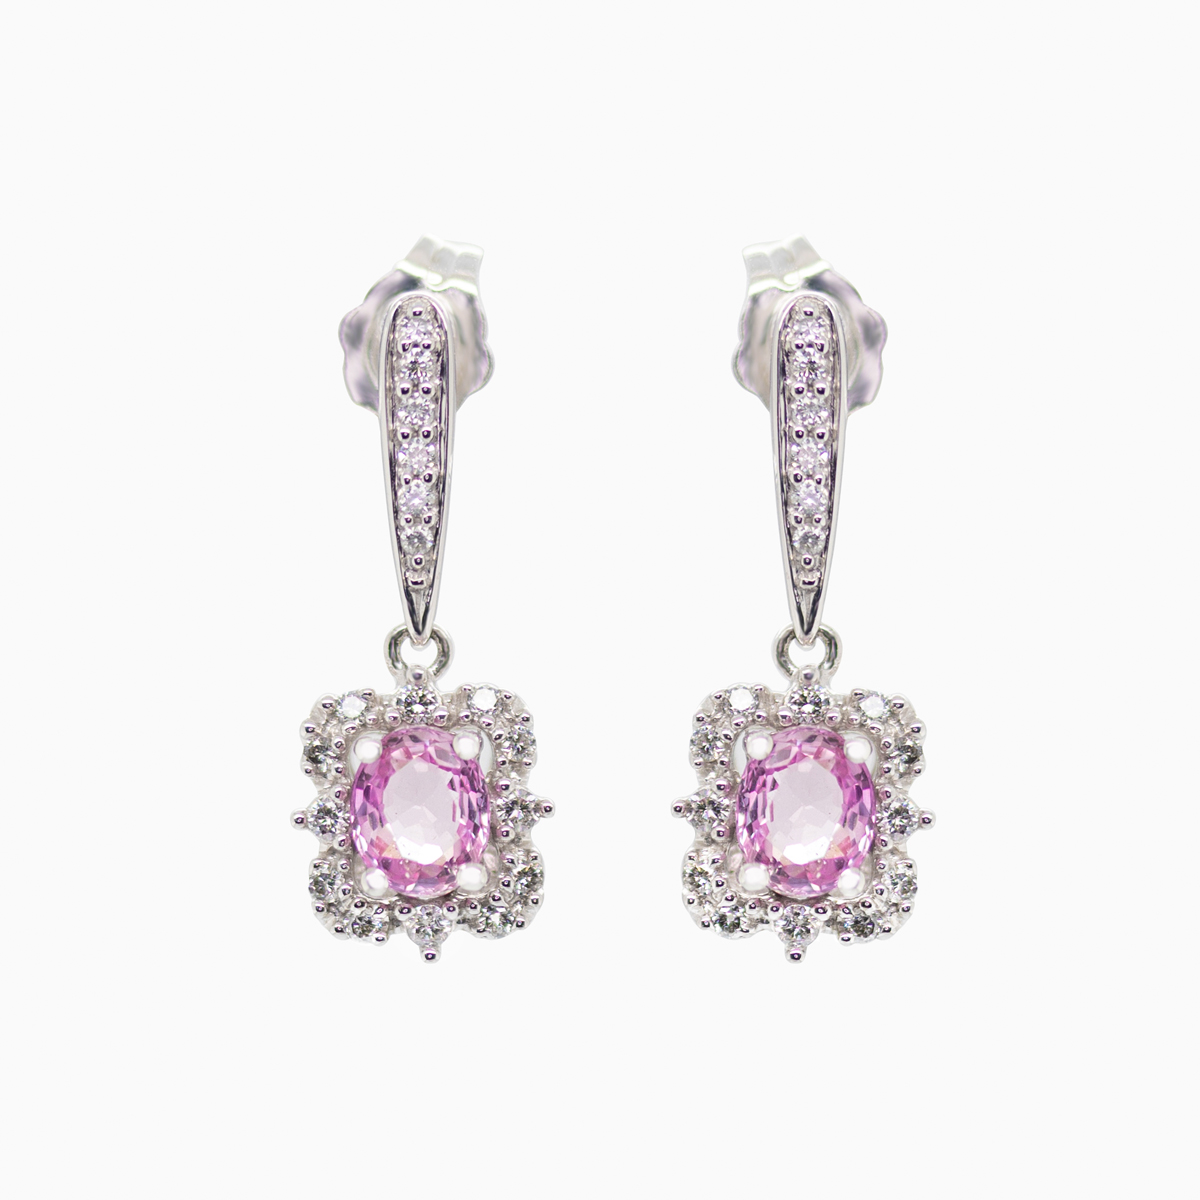 Vintage-inspired  Pink Sapphire and Diamond  Earrings, 14k White Gold